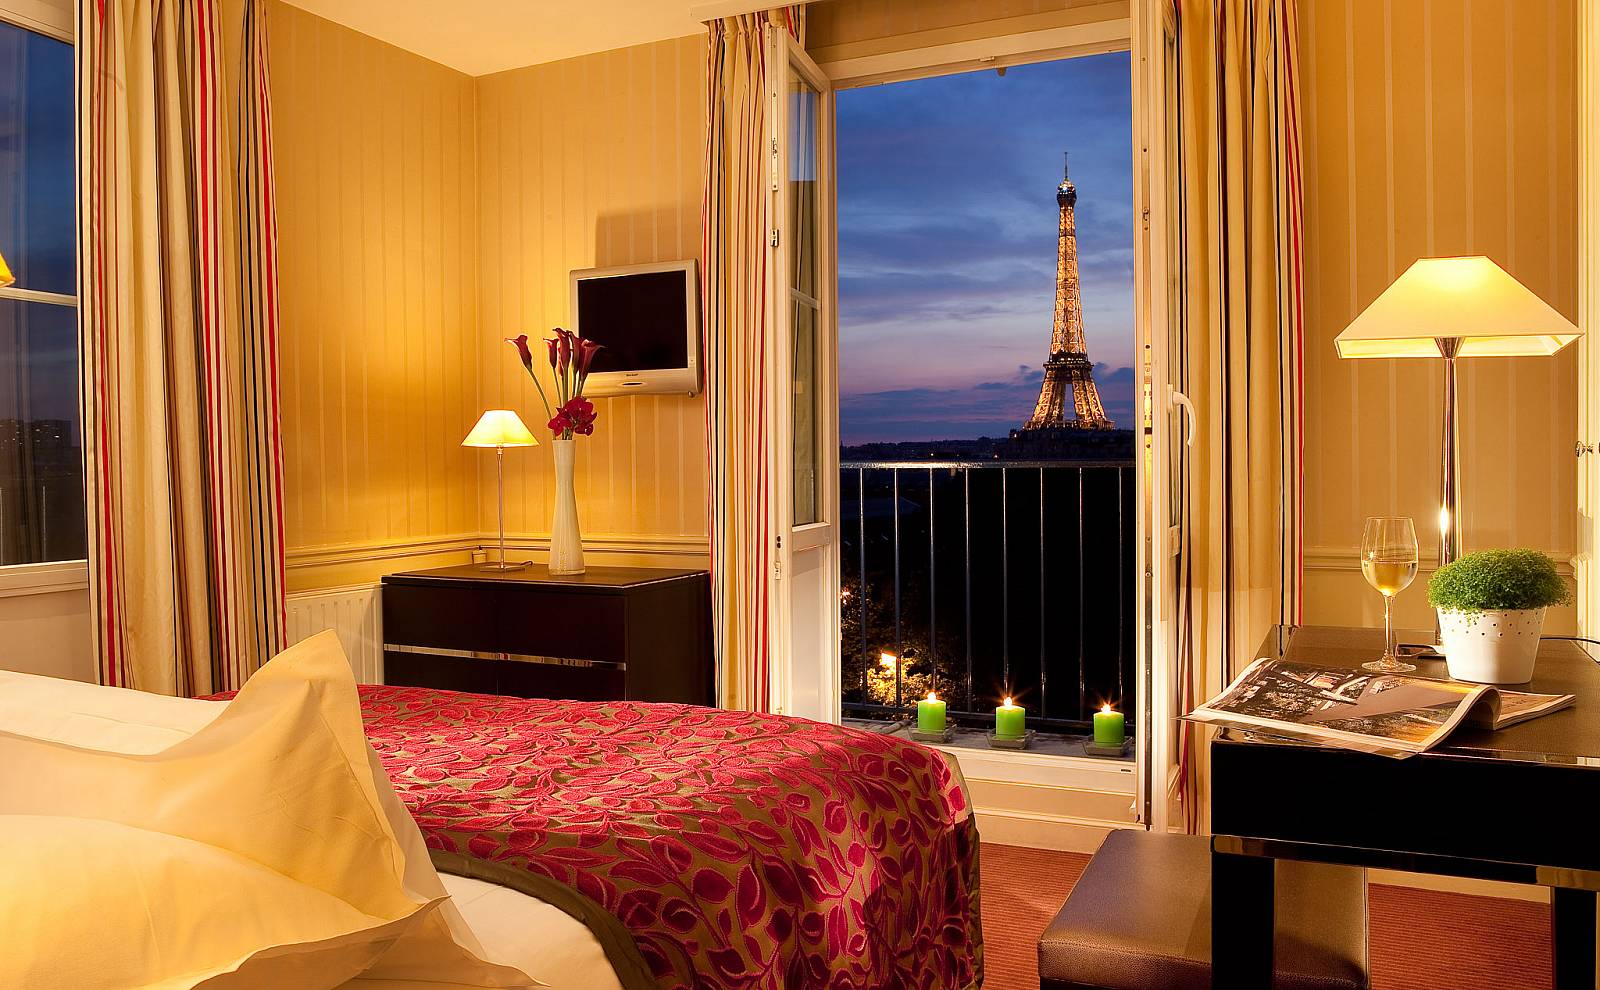 Can You Spend a Weekend in Paris With Just $500? view of paris from room